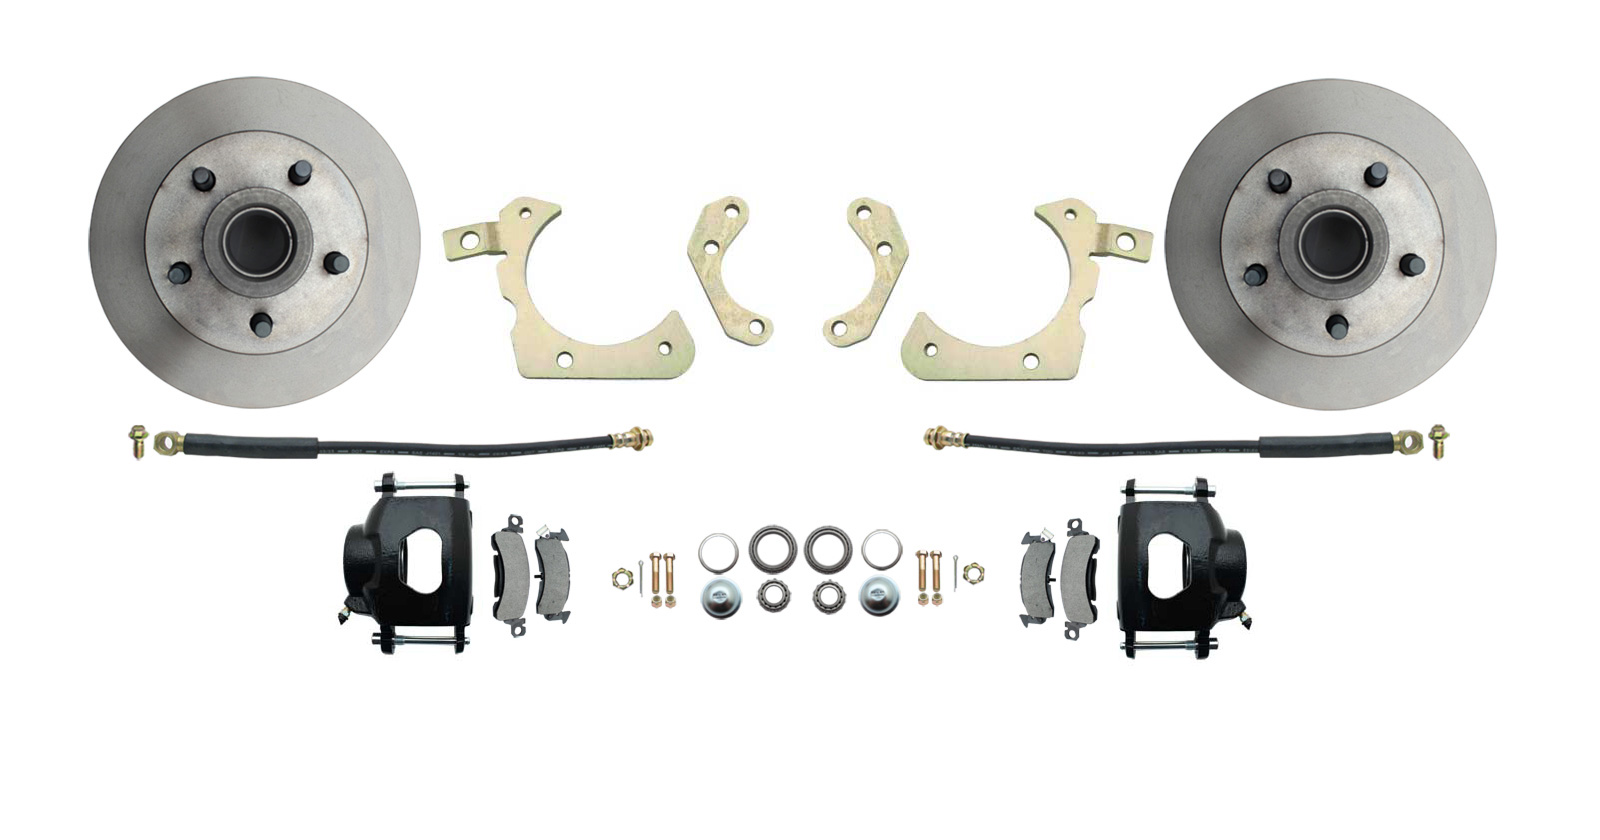 1965-1968 Full Size Chevy Complete Disc Brake Conversion Kit W/ Powder Coated Black Calipers